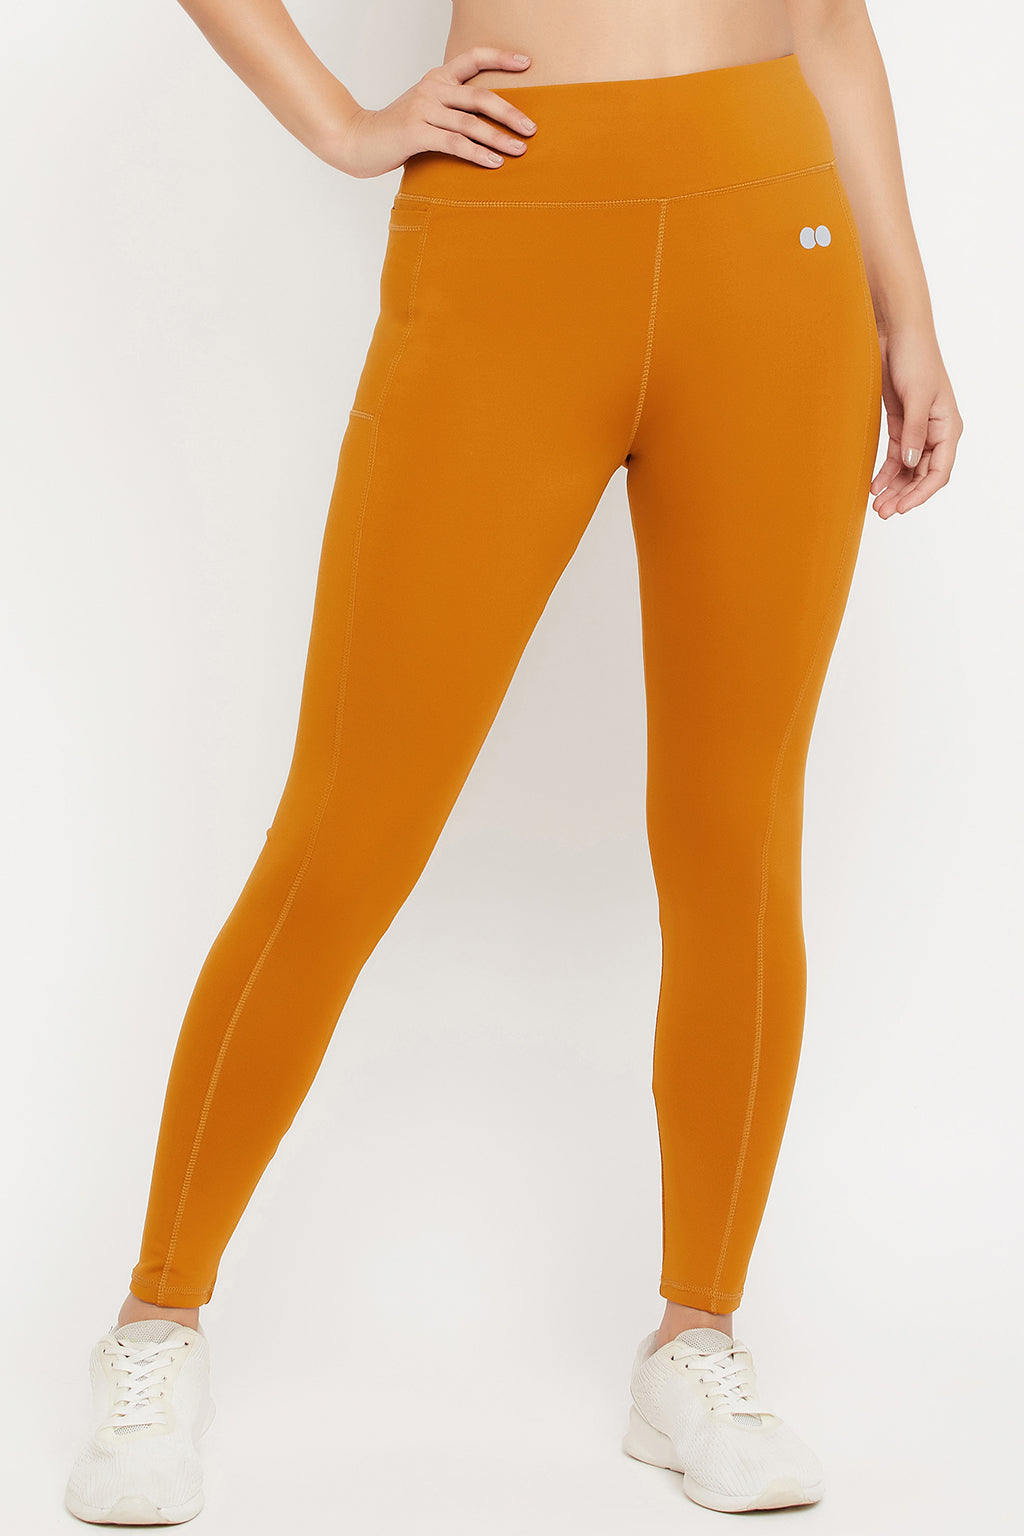 Mustard Yellow High-Rise Active Tights with Side Pocket